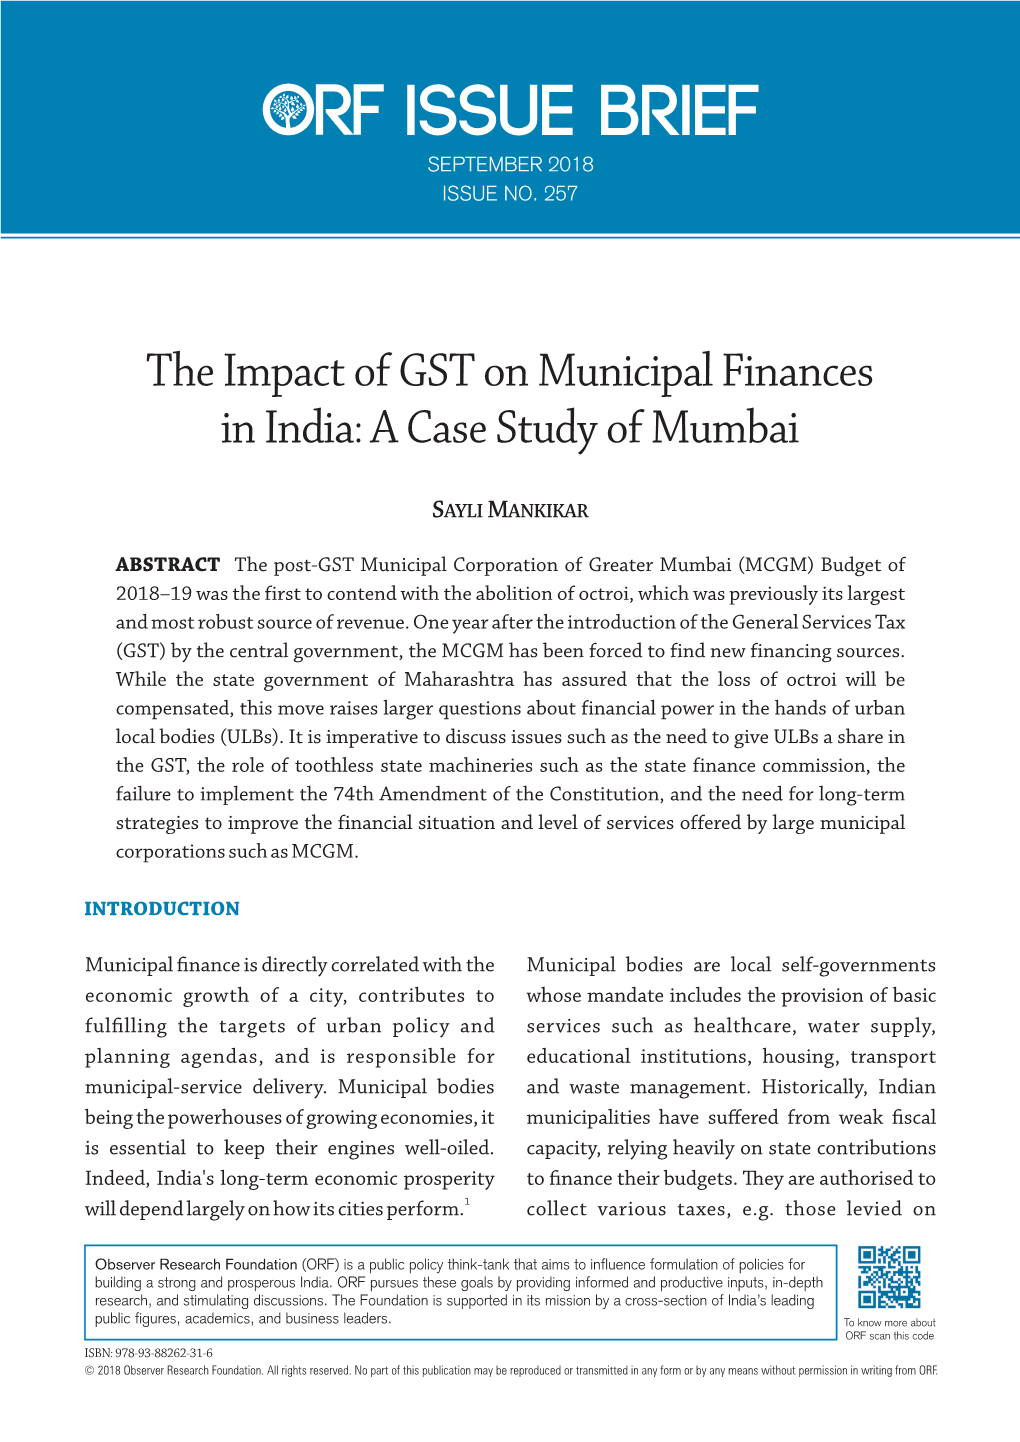 The Impact of GST on Municipal Finances in India: a Case Study of Mumbai